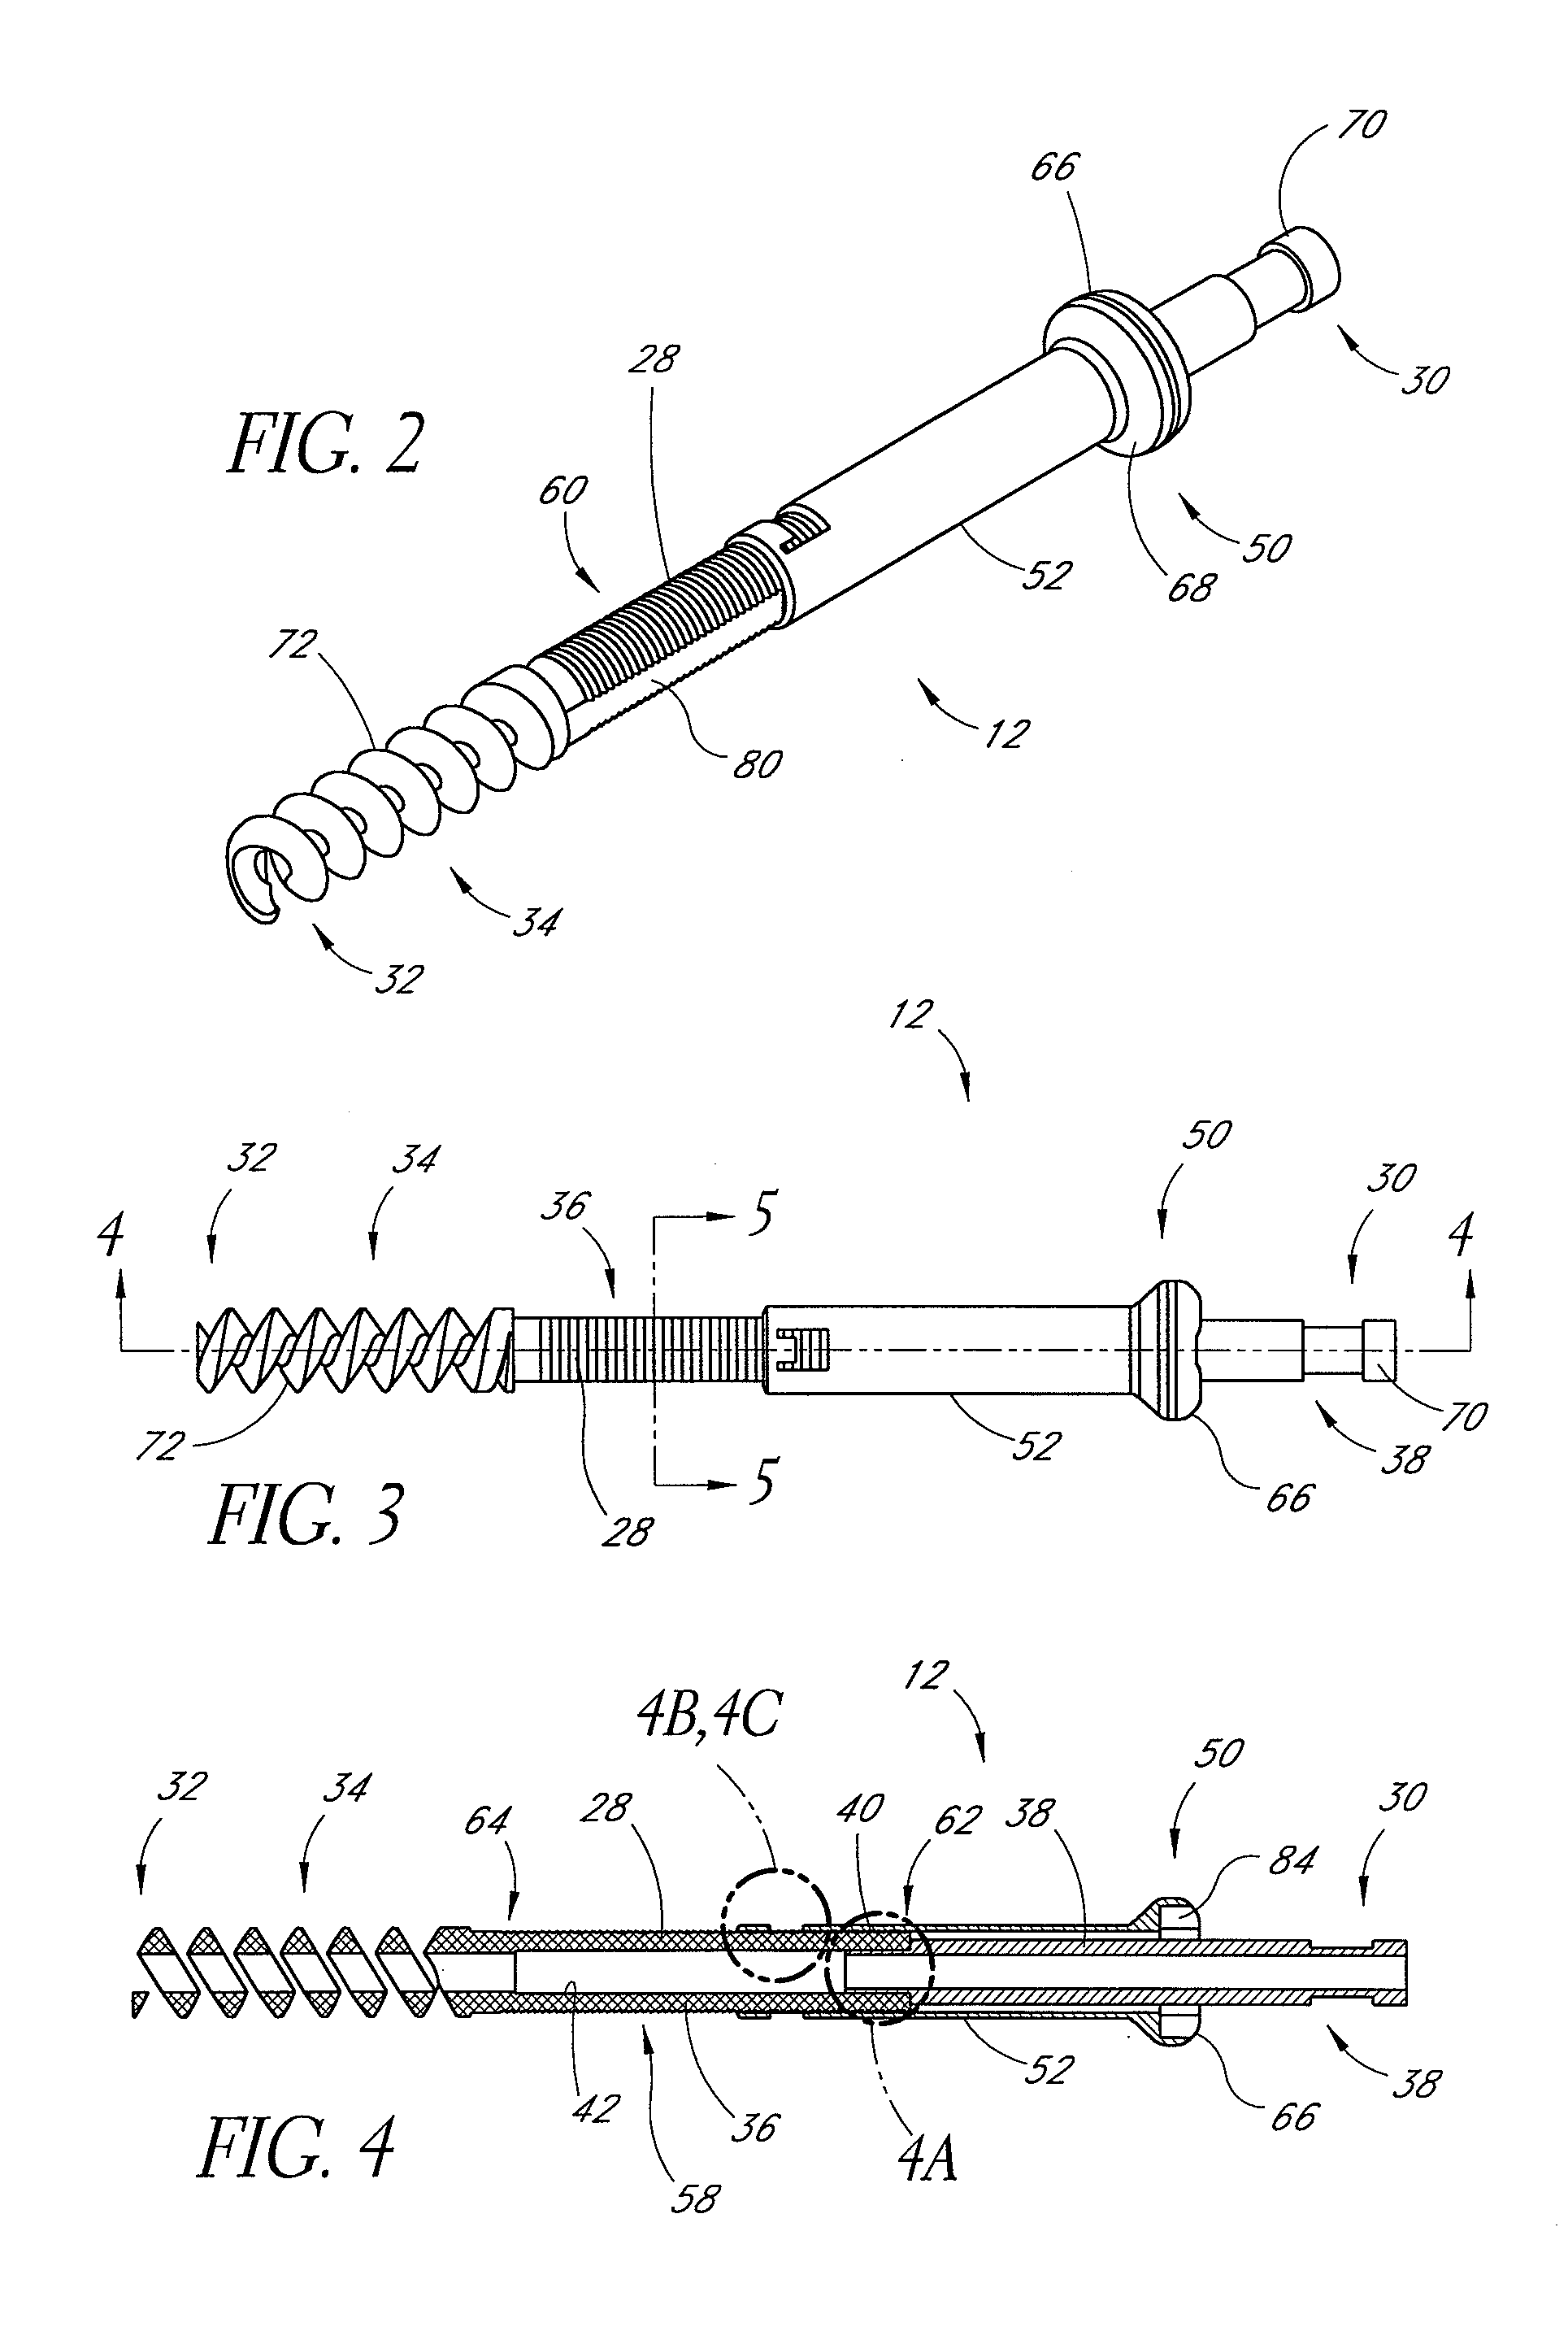 Method and apparatus for spinal fixation